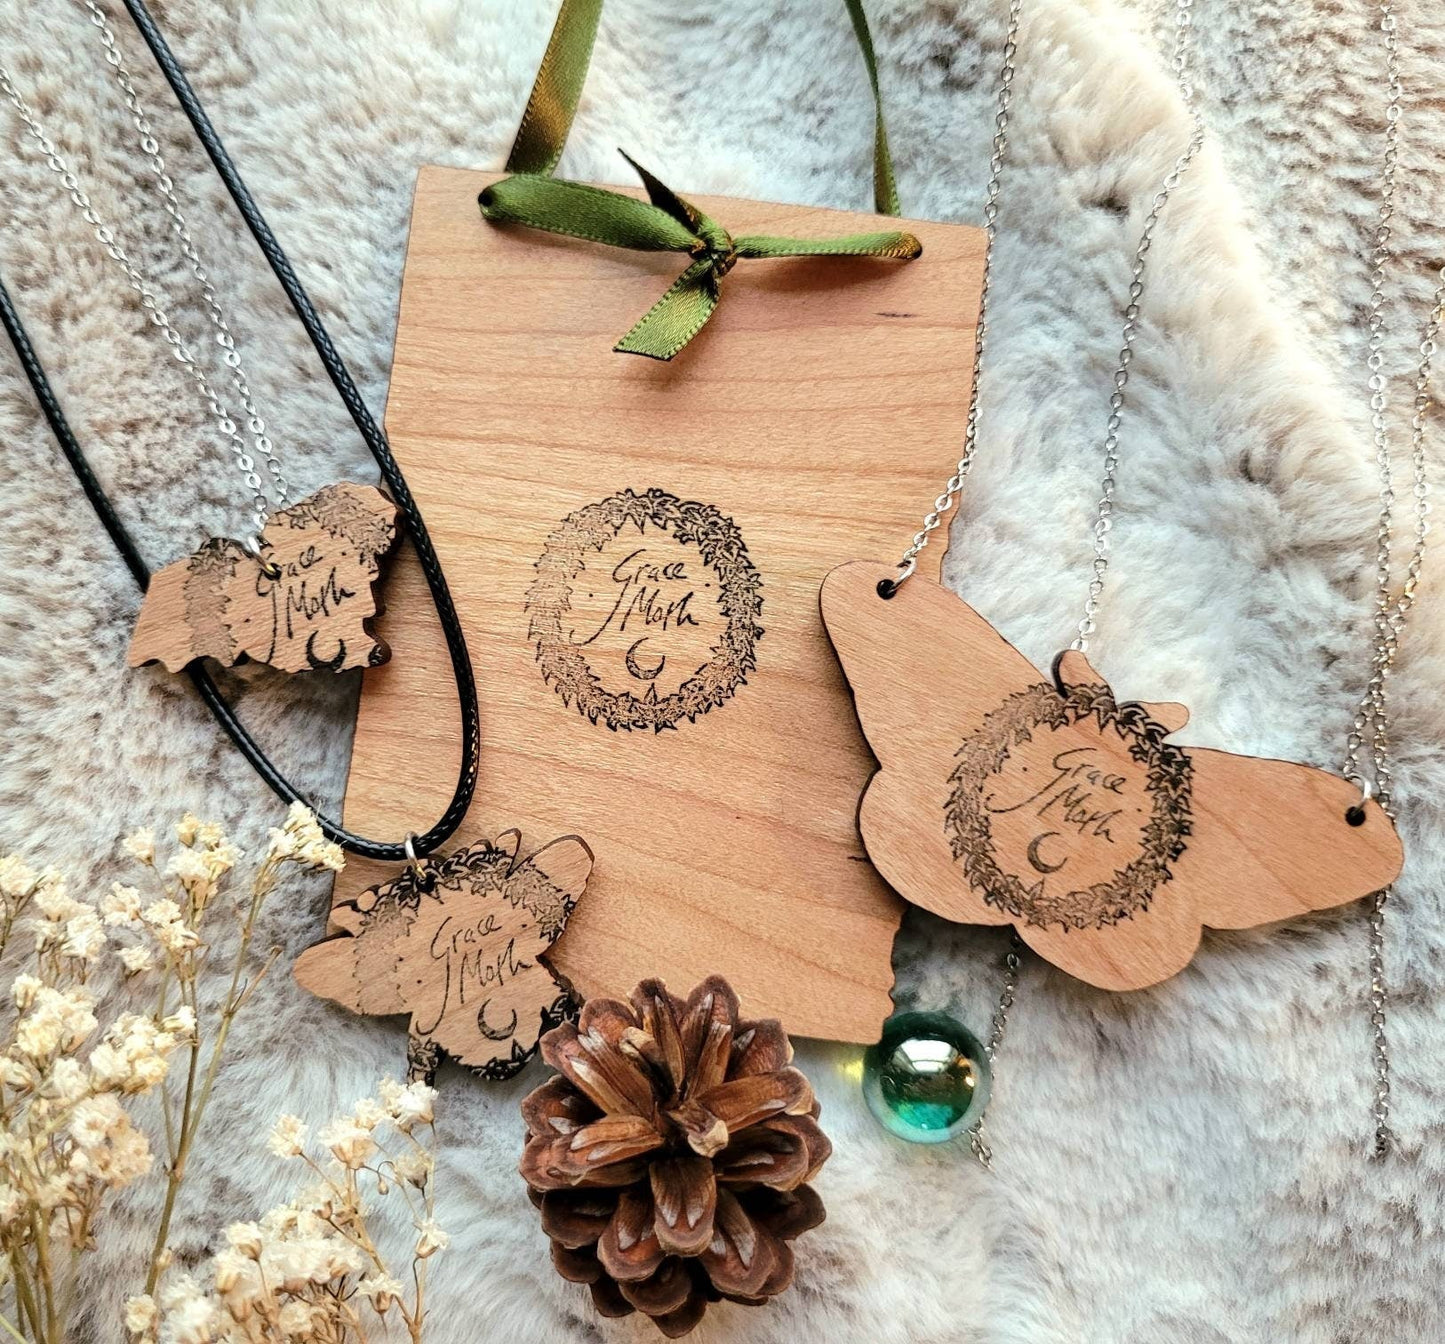 Here lies a Fungi illustrated necklace, responsibly sourced cherry wood, chain options available, by Grace Moth